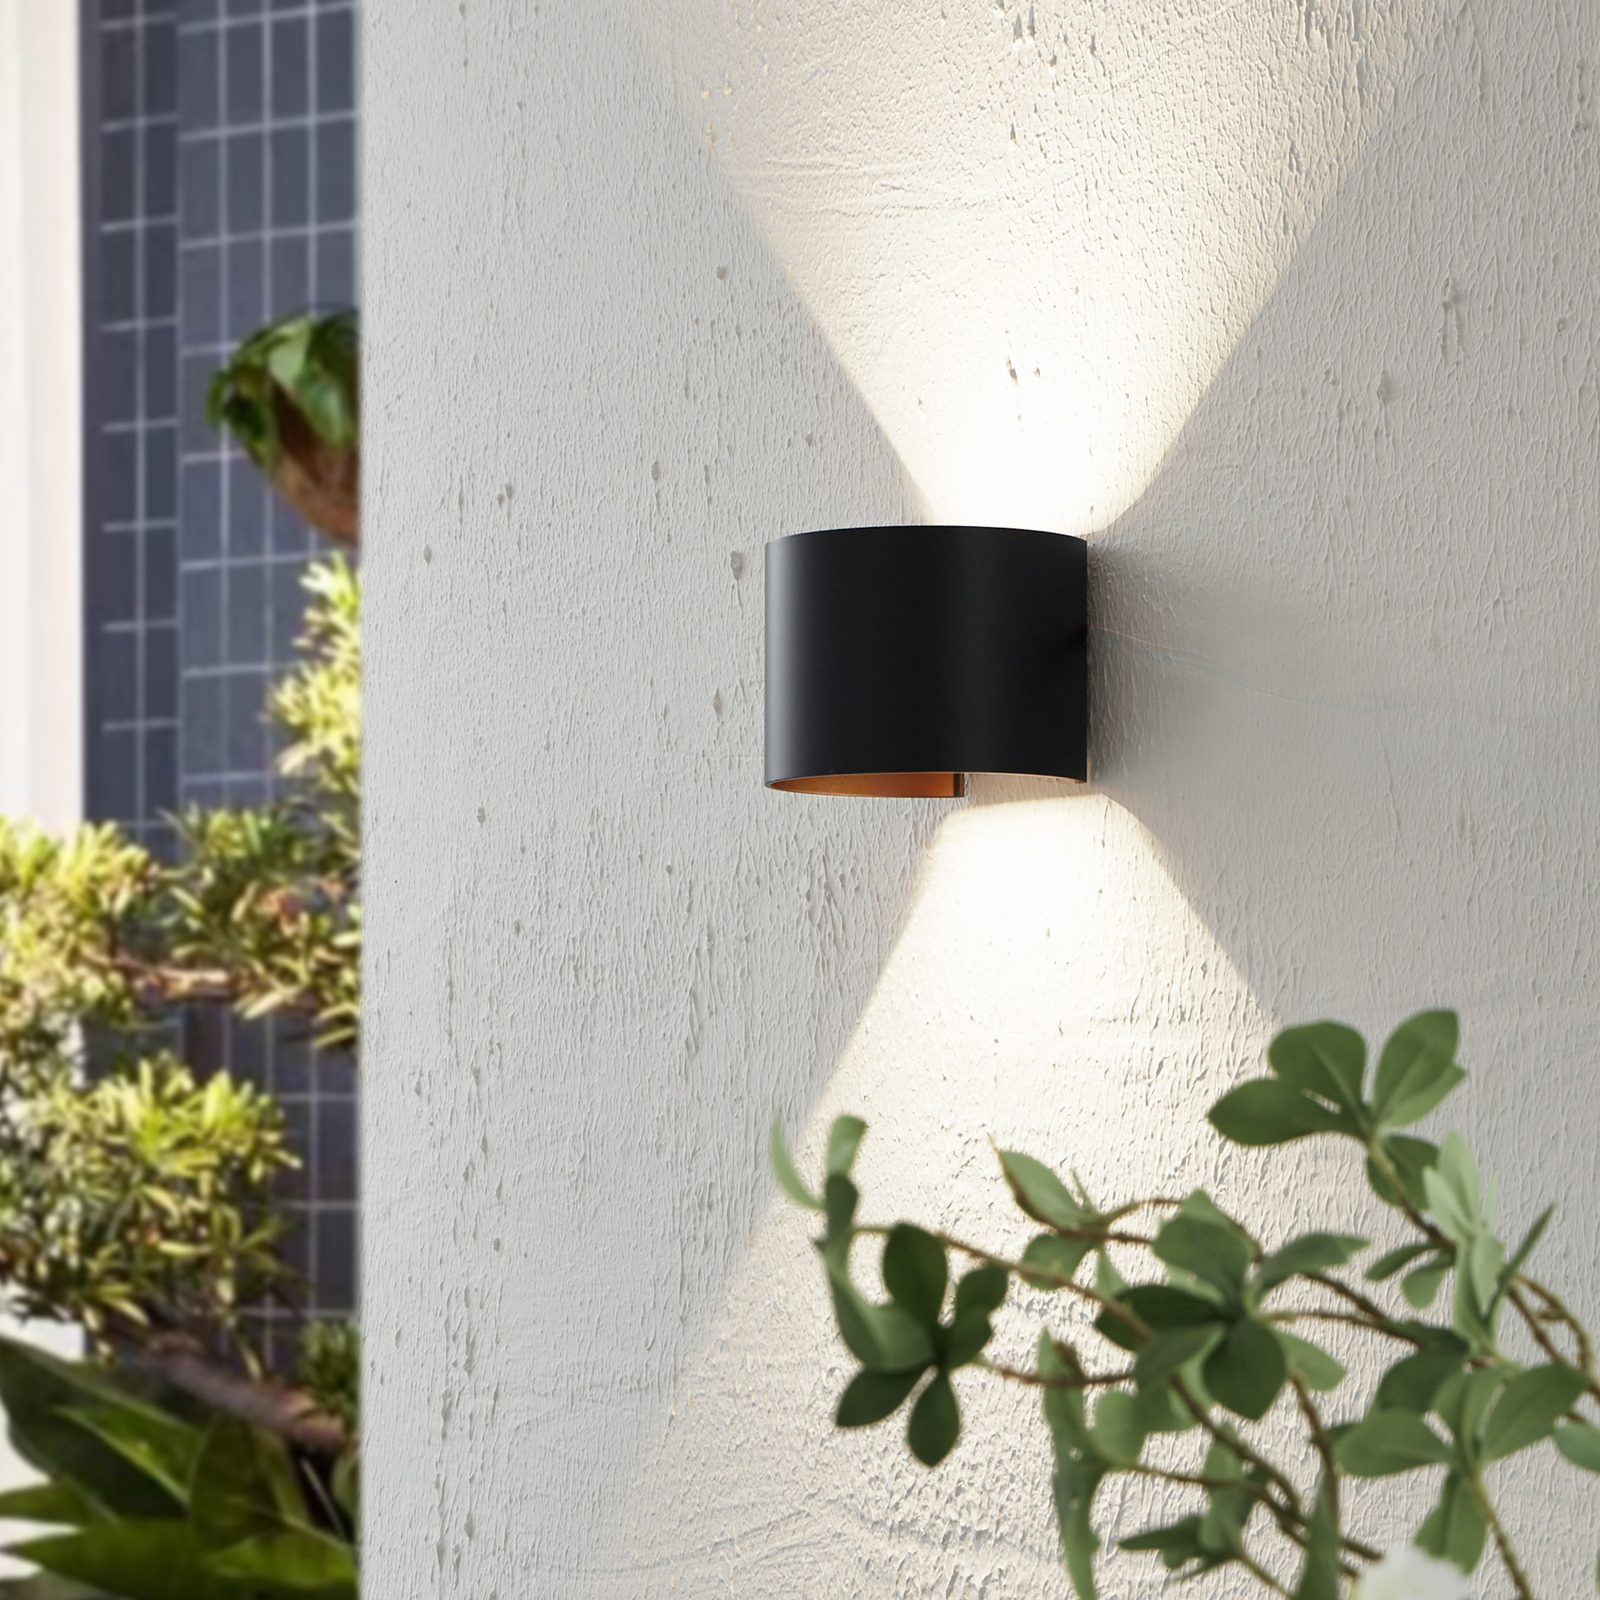 Lindby Nivar LED outdoor wall lamp round black/gold